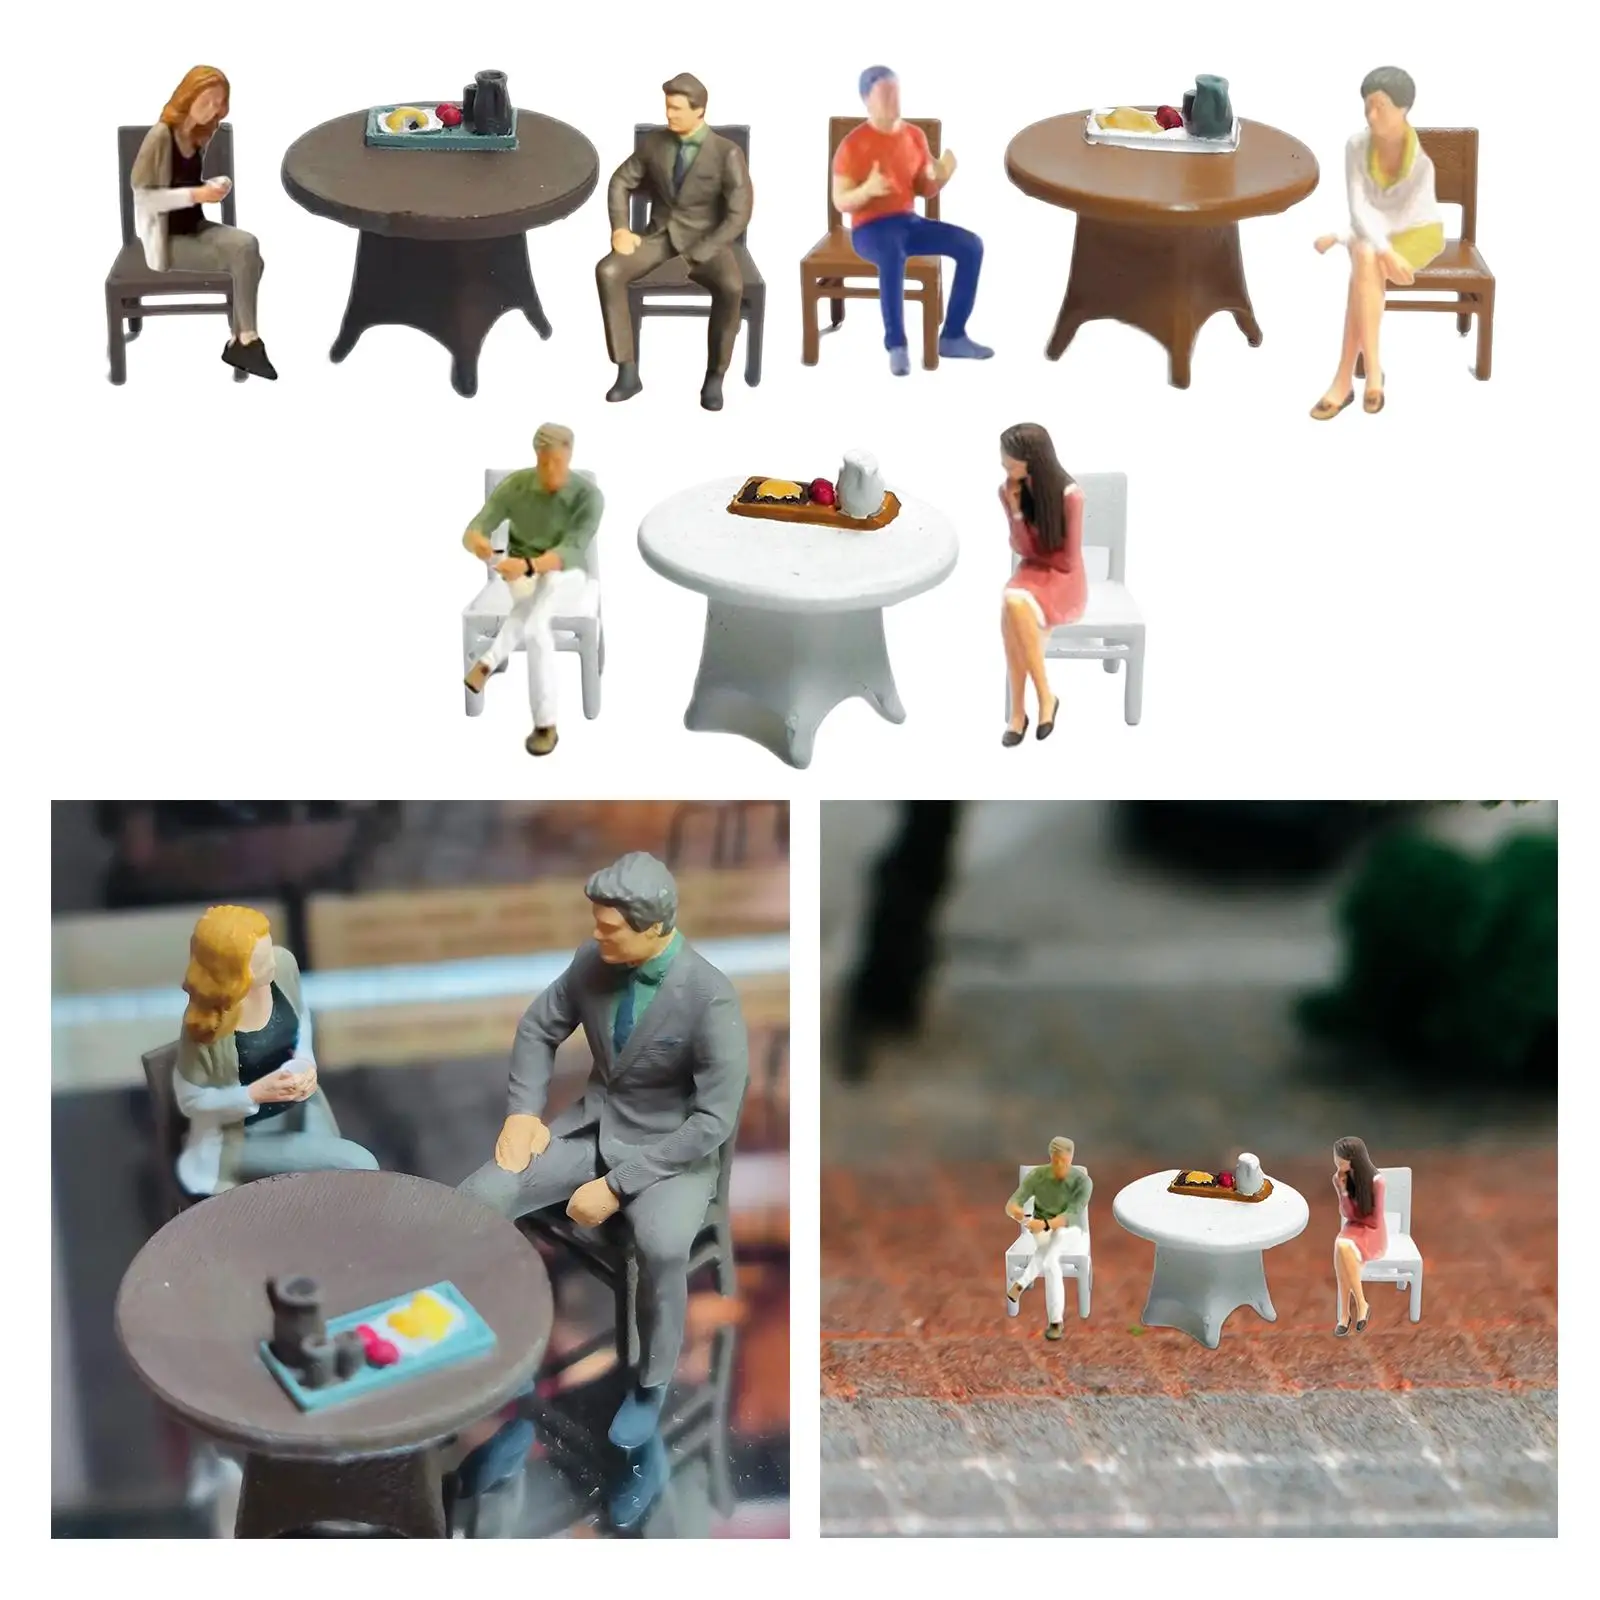 1/64 Action Figures Sand Table Ornament Realistic Collectibles People Figurines for Miniature Scene Dollhouse Decor Accessories